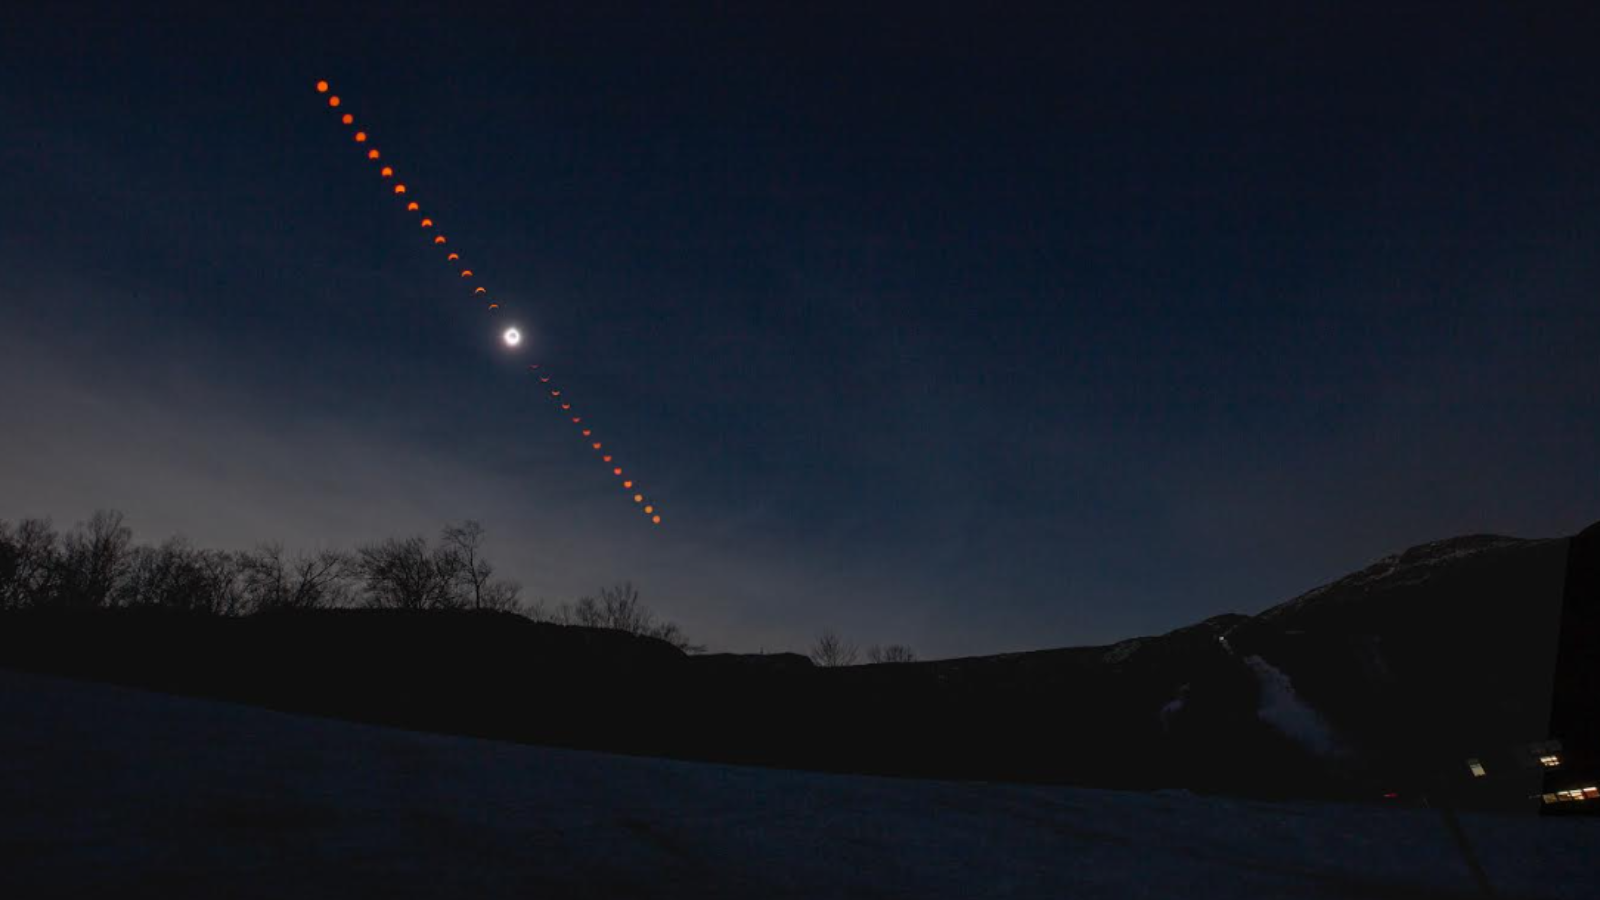 The total solar eclipse on April 8 as seen over Stowe, Vermont